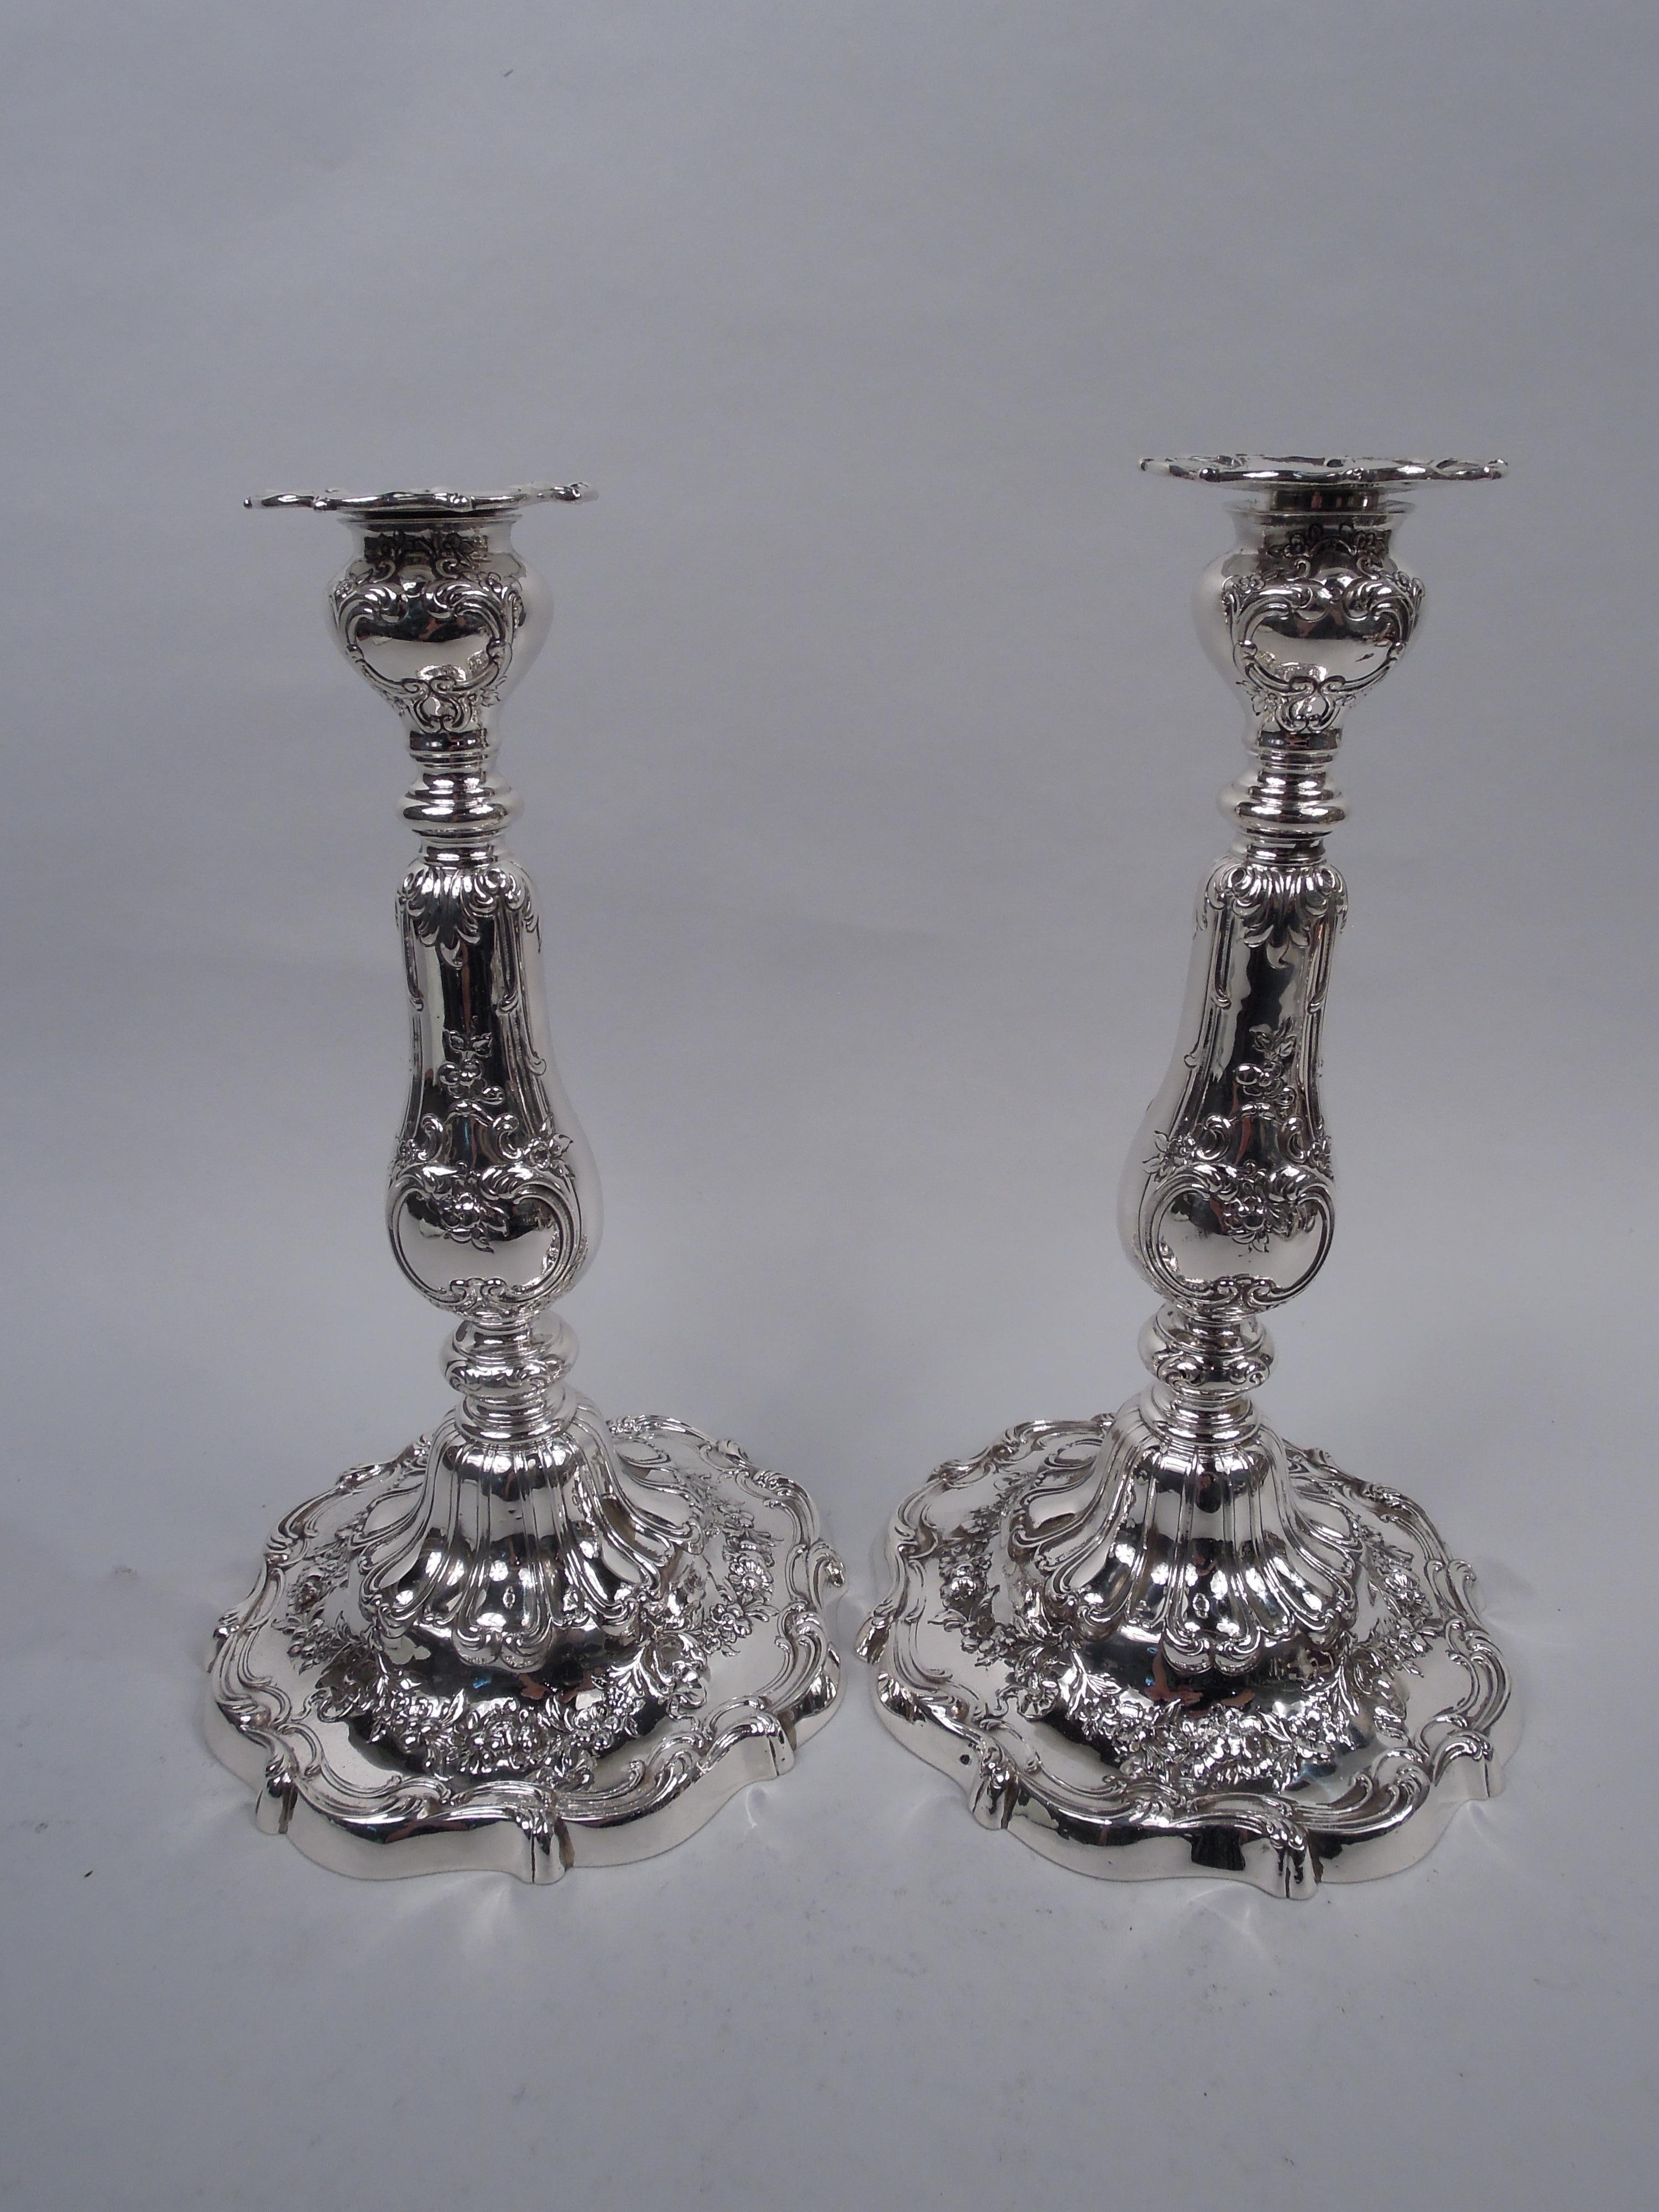 Pair of Edwardian Classical sterling silver candlesticks. Made by Gorham in Providence in 1914. Each: Ovoid socket with detachable bobeche on knopped baluster shaft; domed foot. Fancy floral garlands, gadroons, leaves, and scrolls. Scrolled rims.